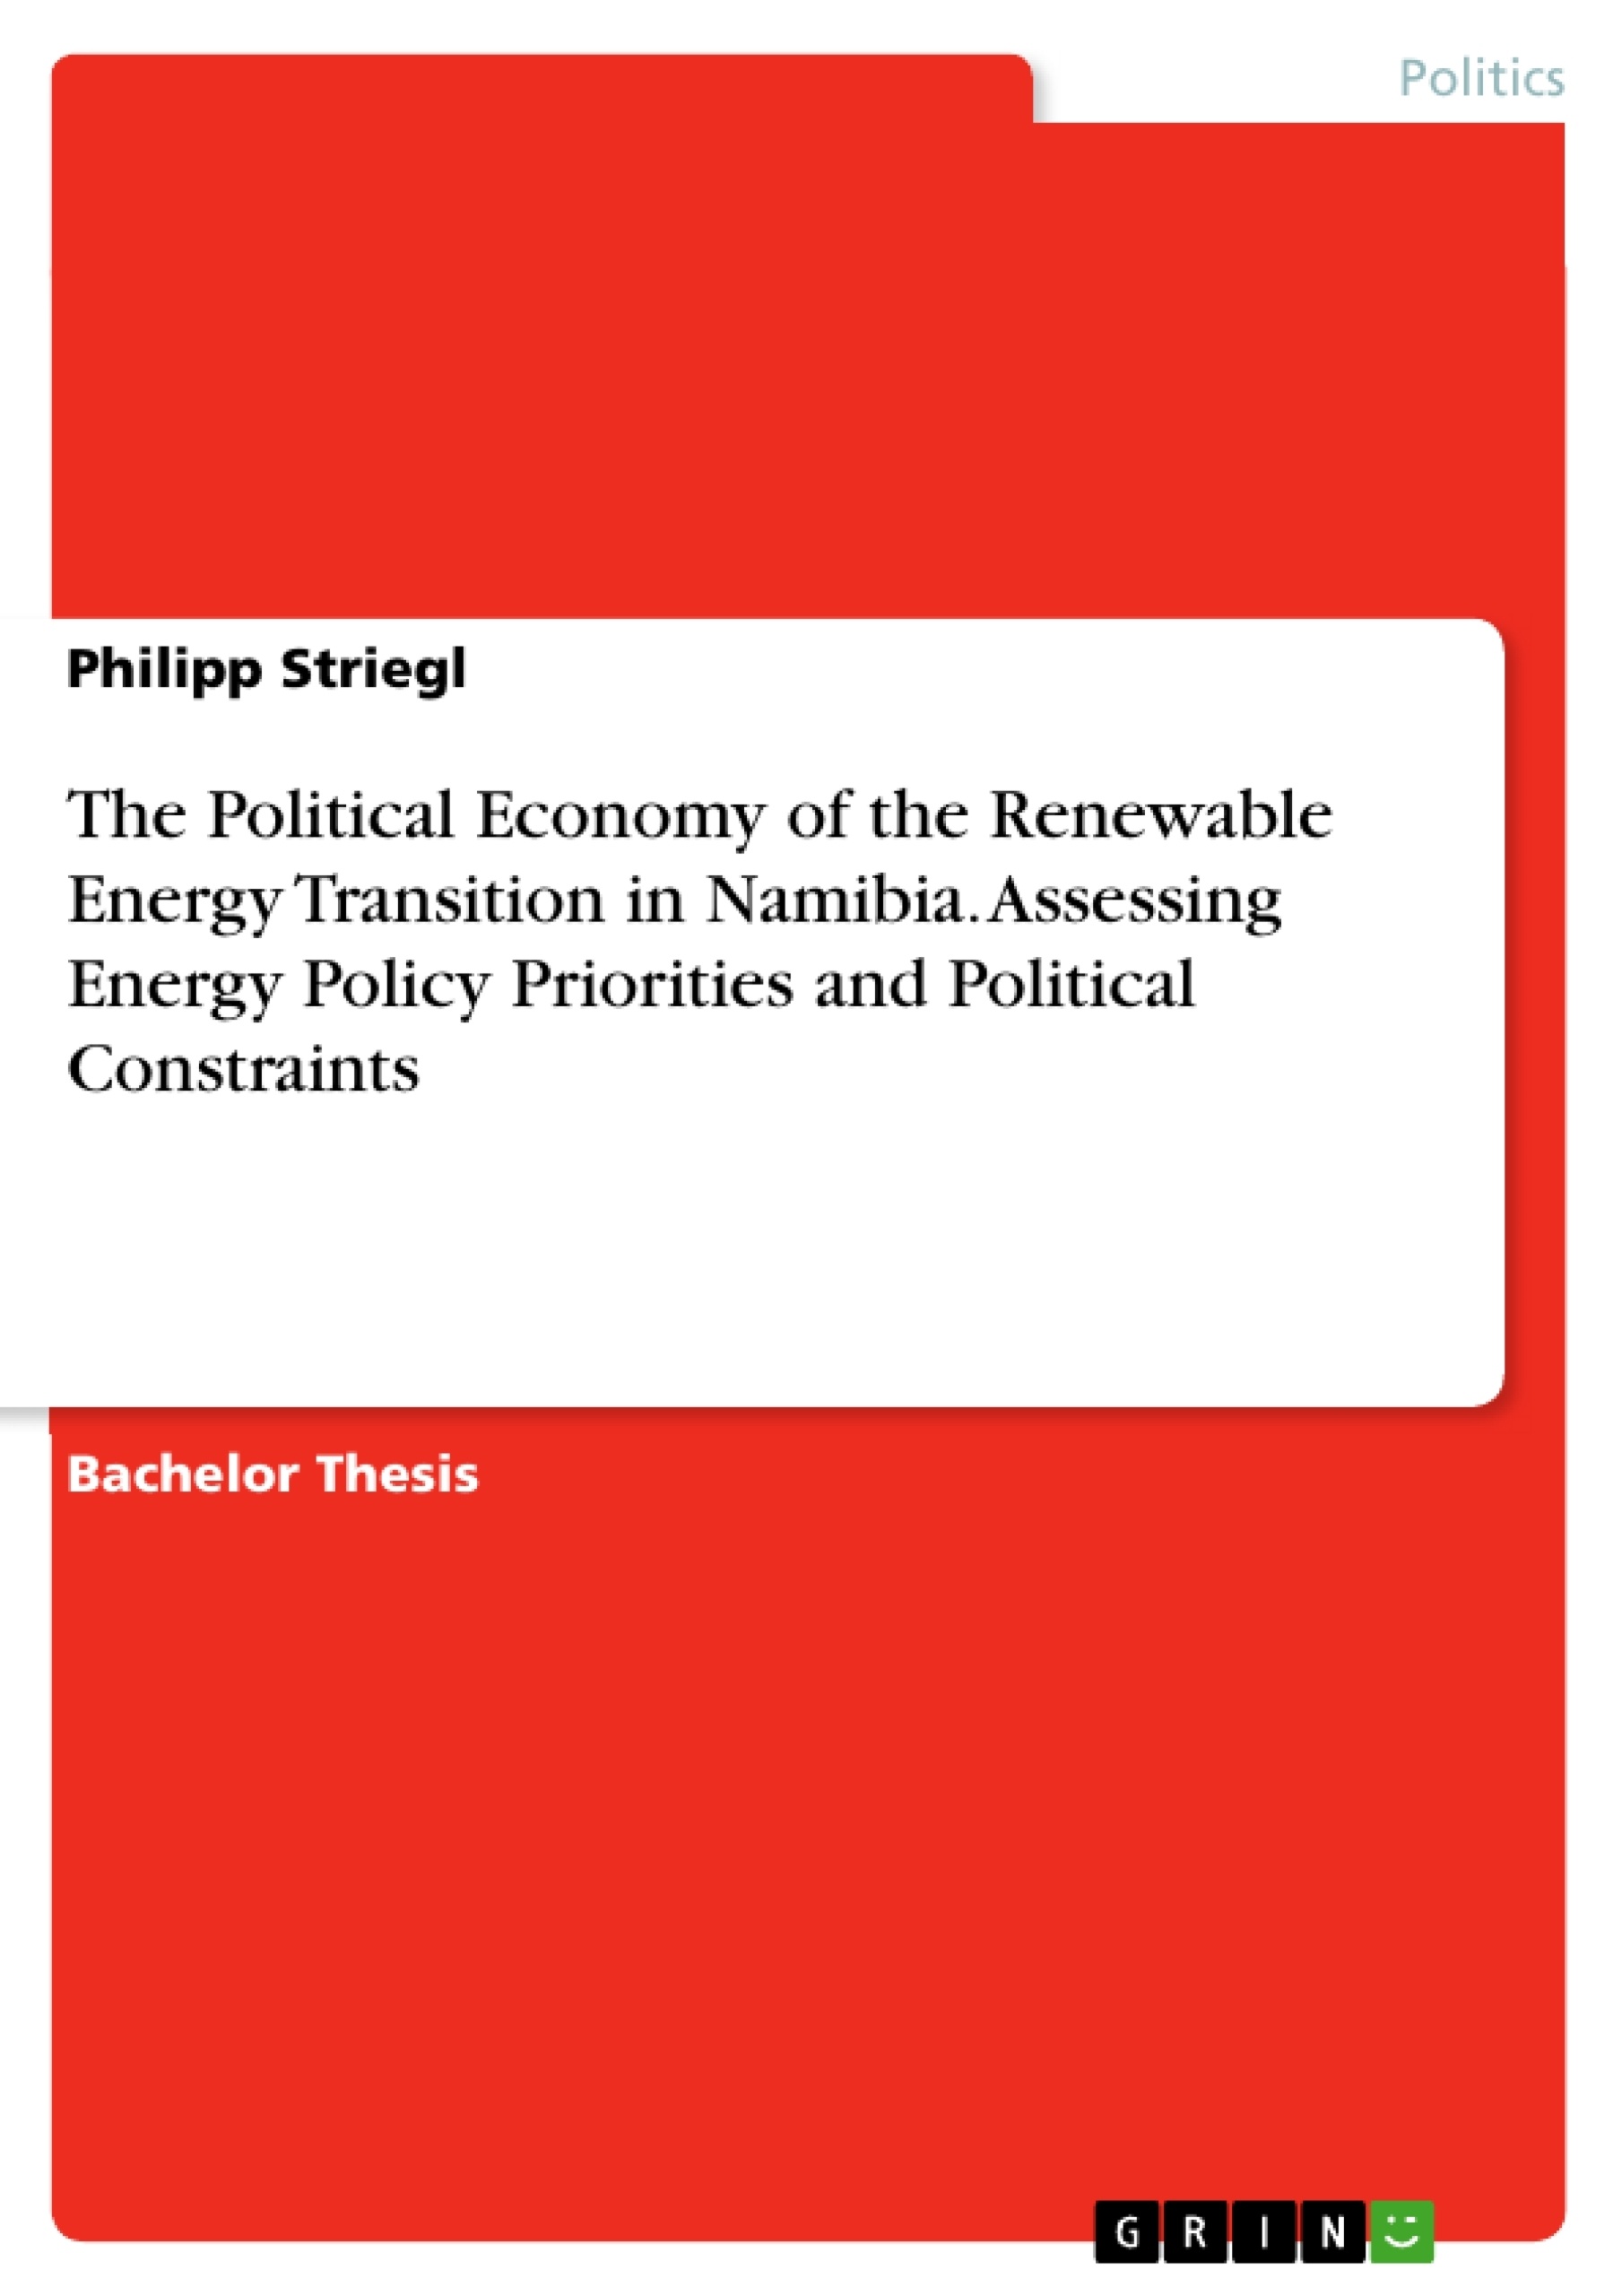 Title: The Political Economy of the Renewable Energy Transition in Namibia. Assessing Energy Policy Priorities and Political Constraints